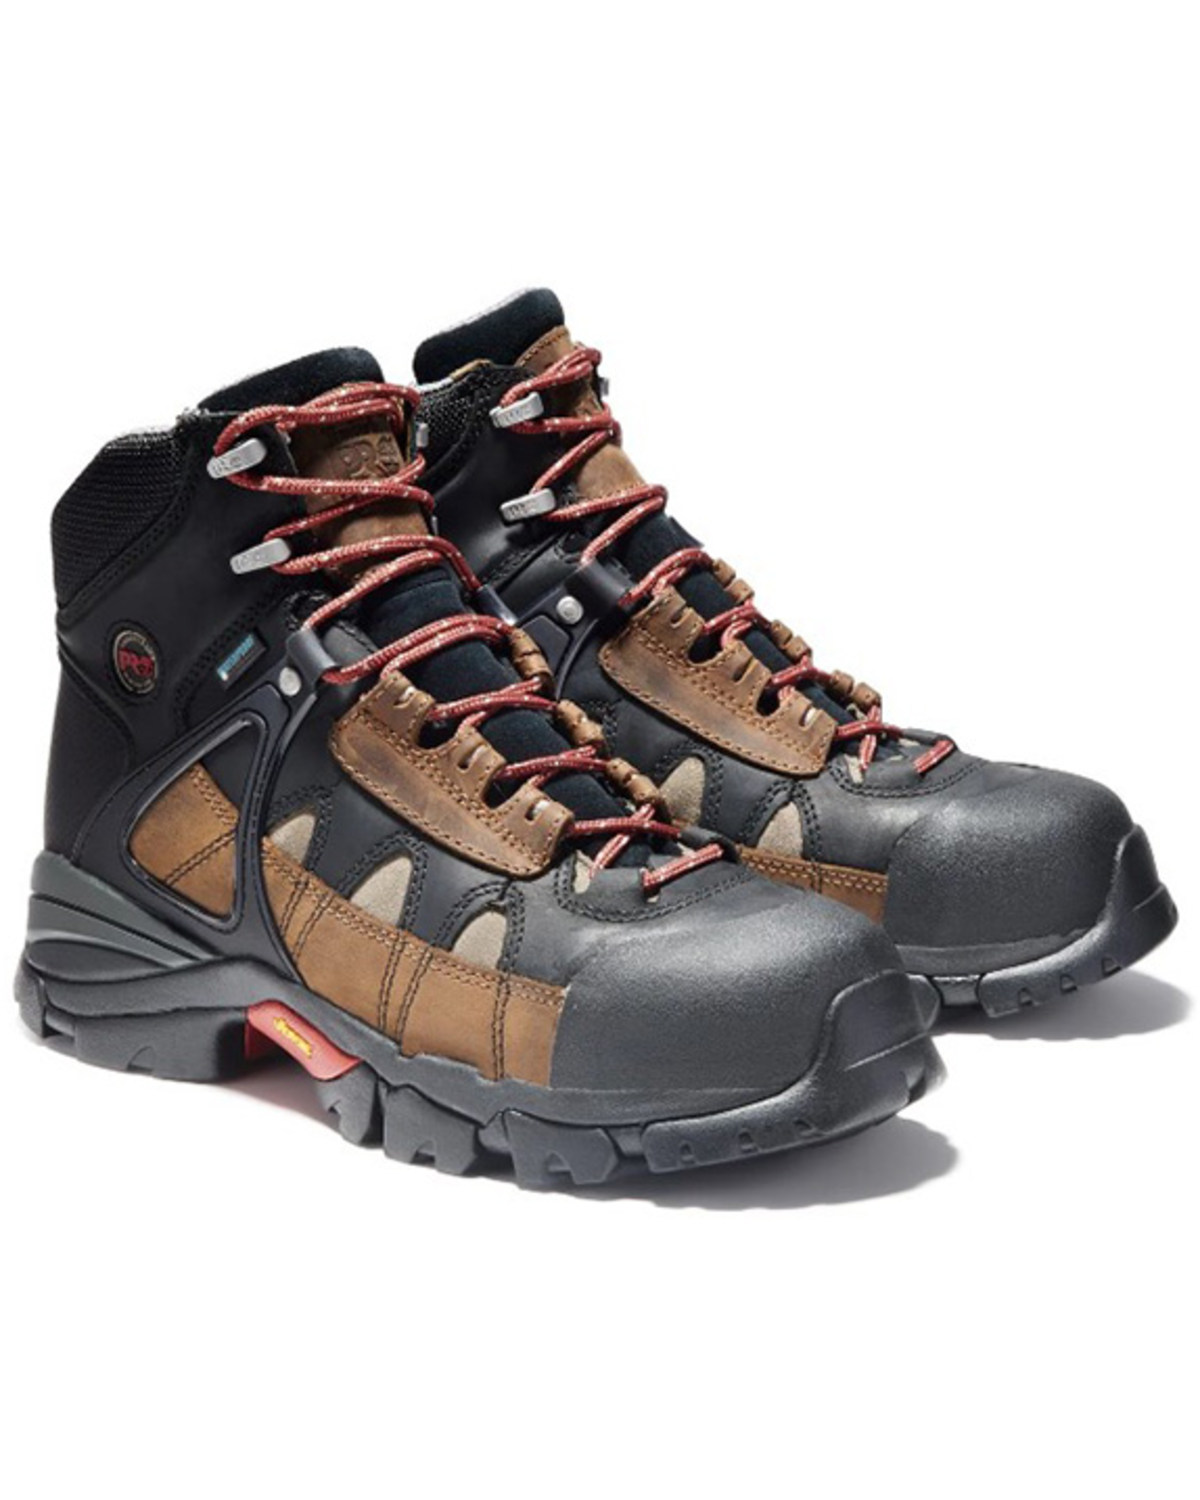 Timberland Men's 6" Hyperion Waterproof Work Boots - Alloy Toe